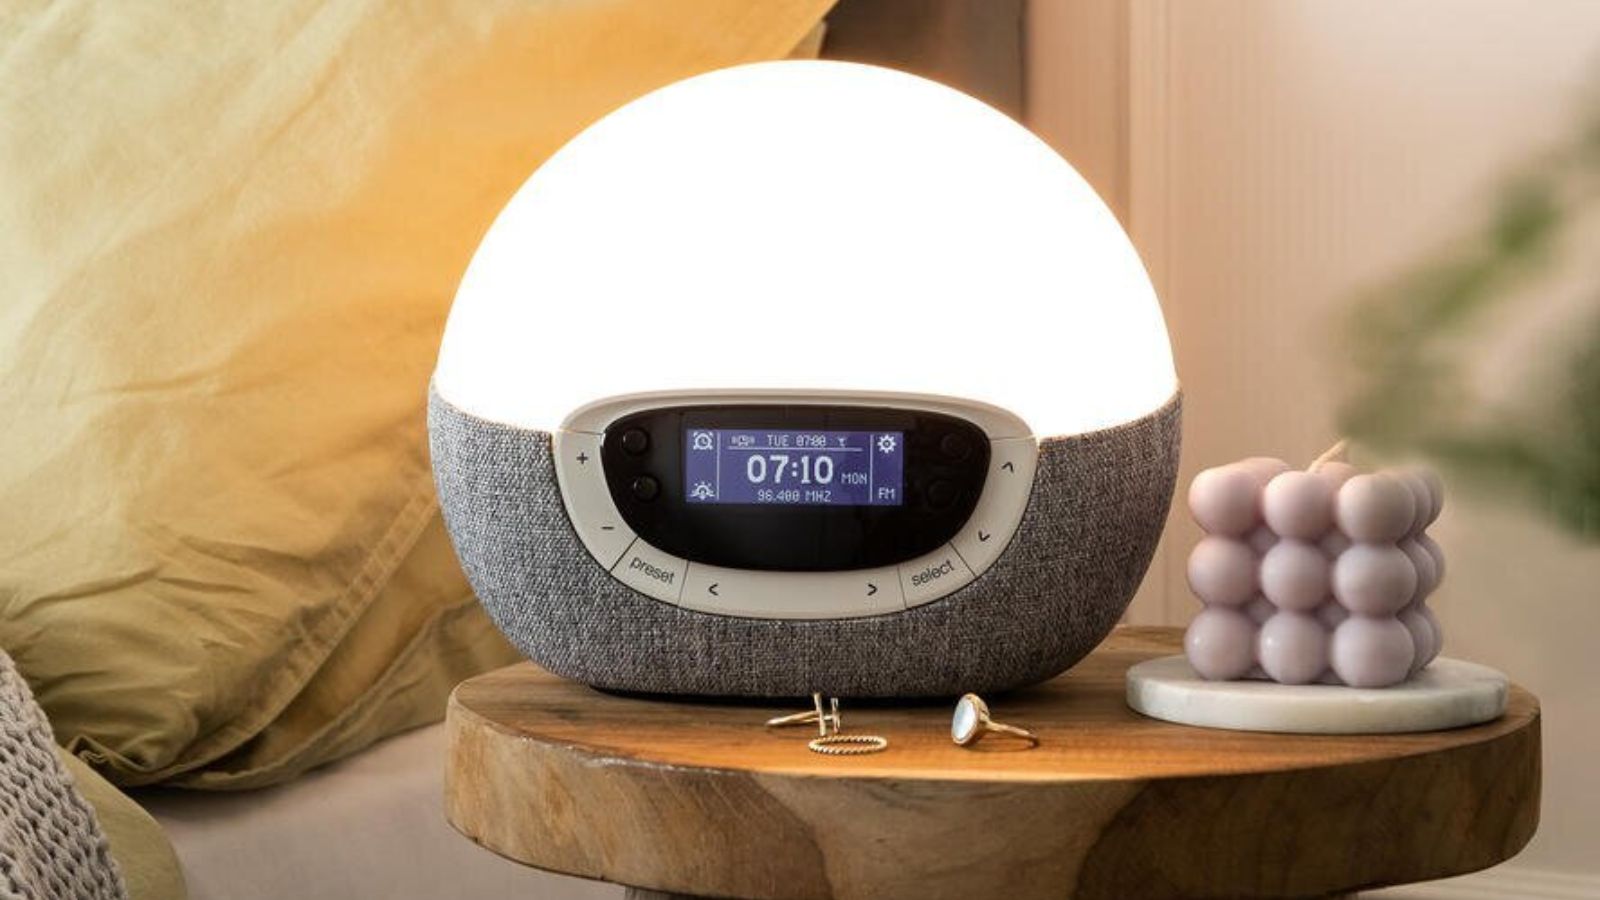 Want to buy a Wake-up Light alarm clock? Check it out on